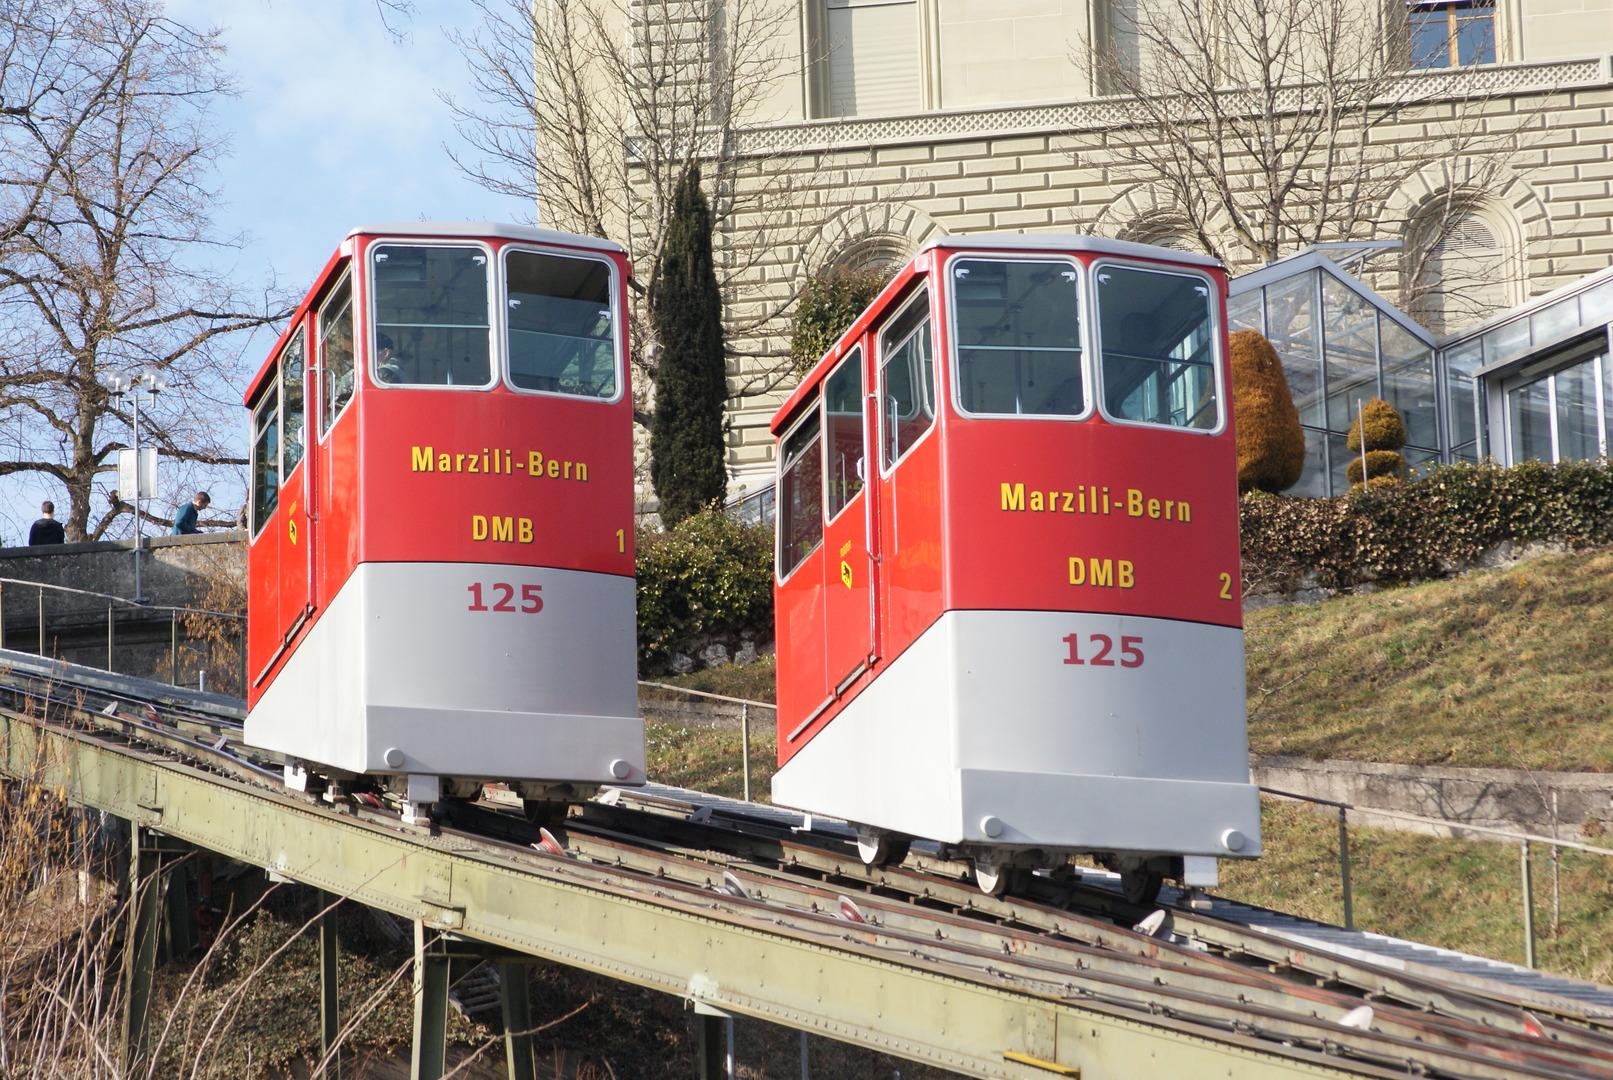 Cover image of this place Drahtseilbahn Marzili-Stadt Bern (DMB)